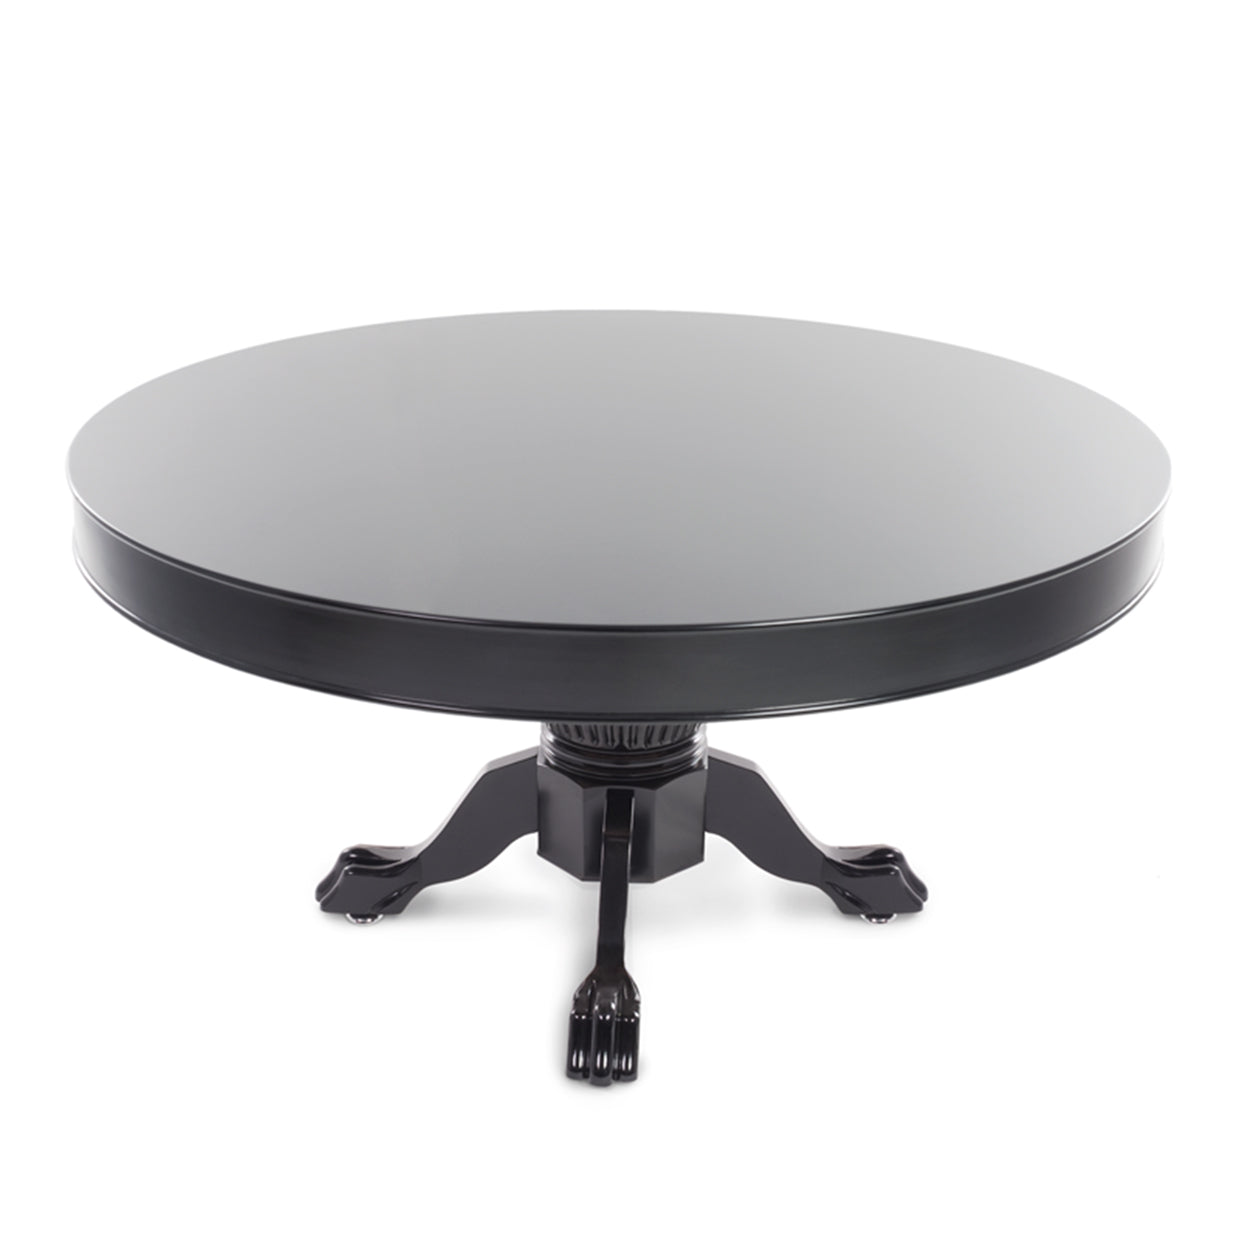 Round wooden dining table top for Nighthawk and Ginza game tables in a black finish.